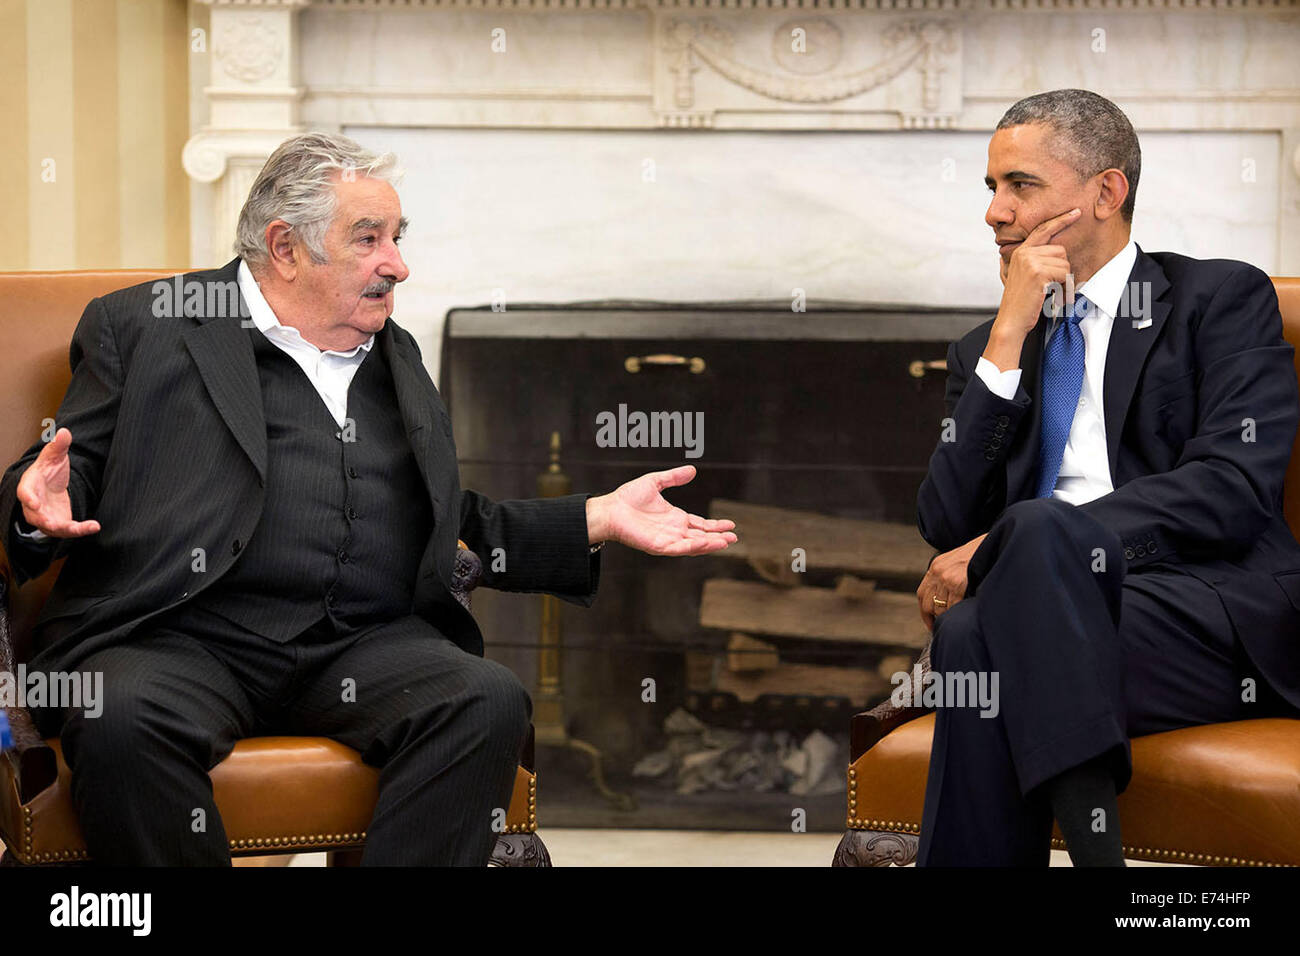 President Barack Obama meets with President José Mujica Cordano of Uruguay in the Oval Office, May 12, 2014. Stock Photo